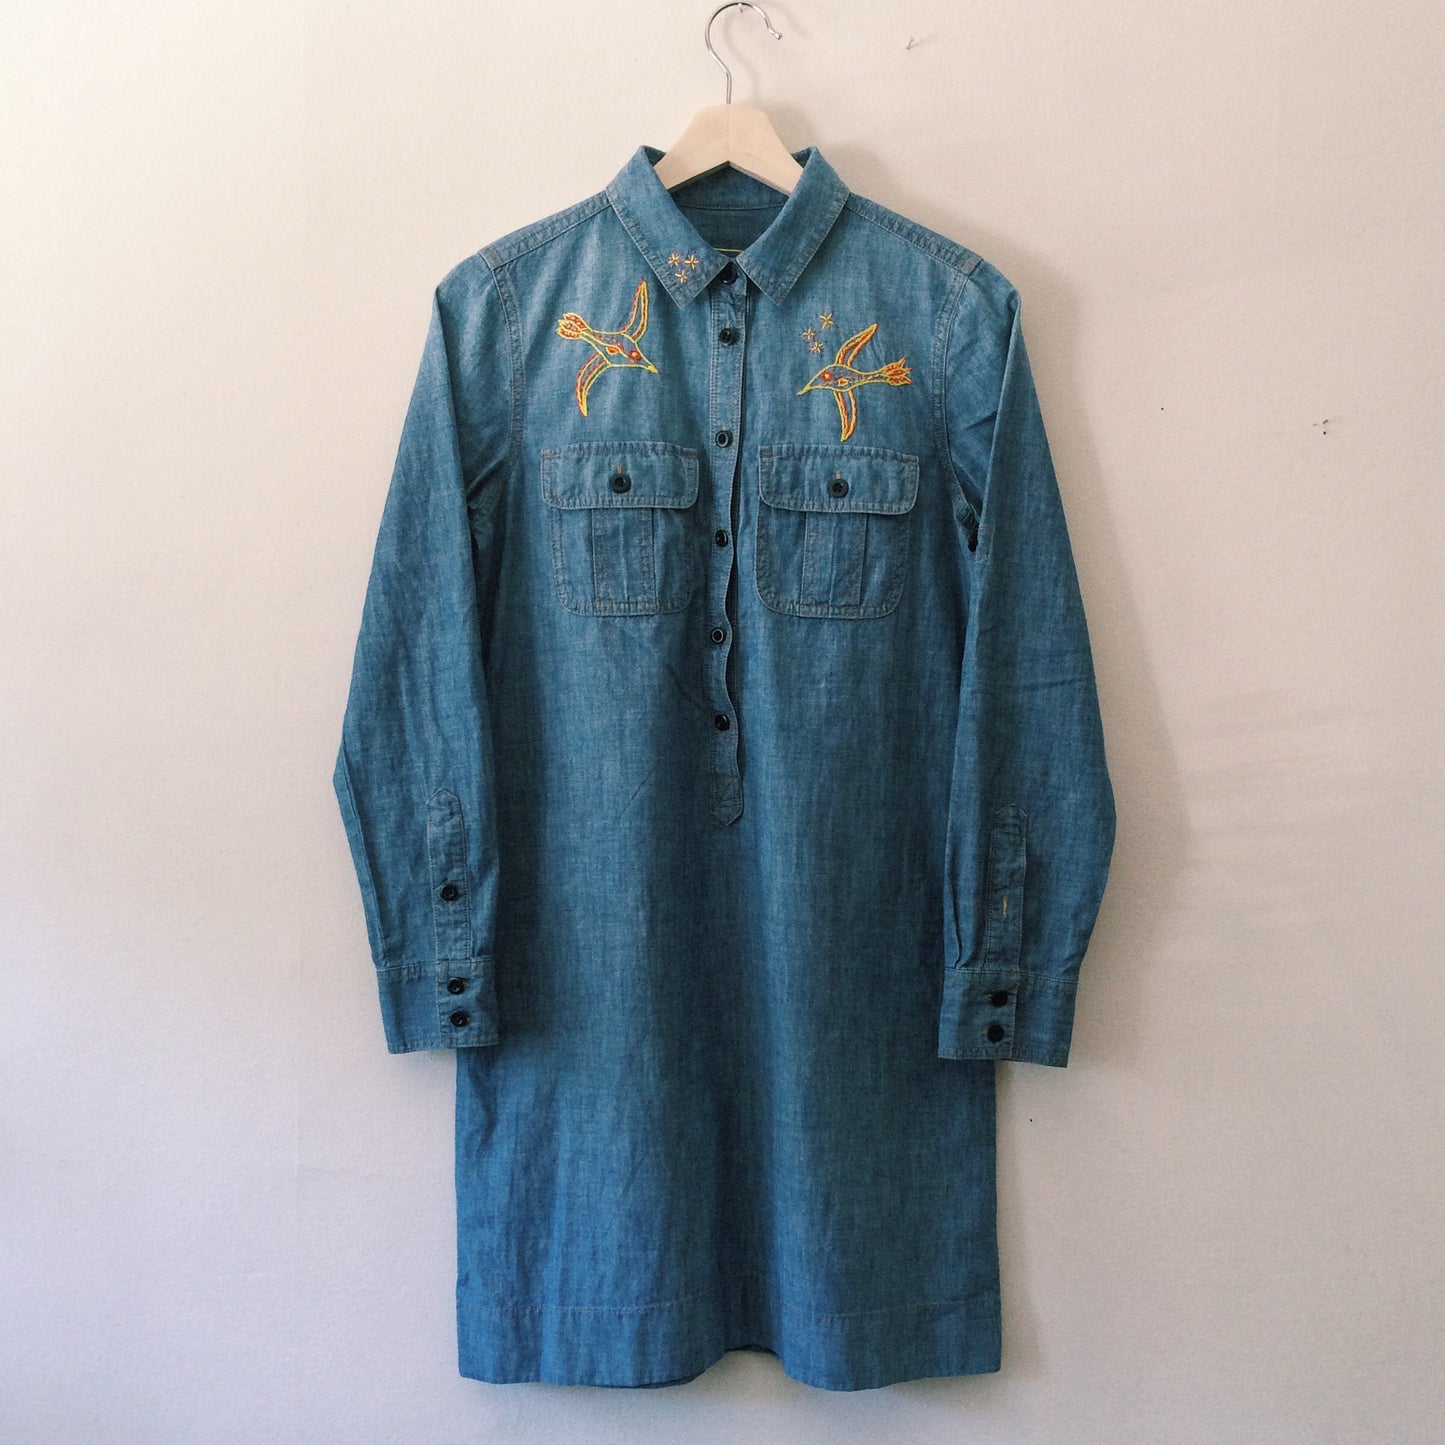 Dreams of Flying Hand Embroidered Denim Tunic.  Size Small. One of a Kind and Ready to Ship